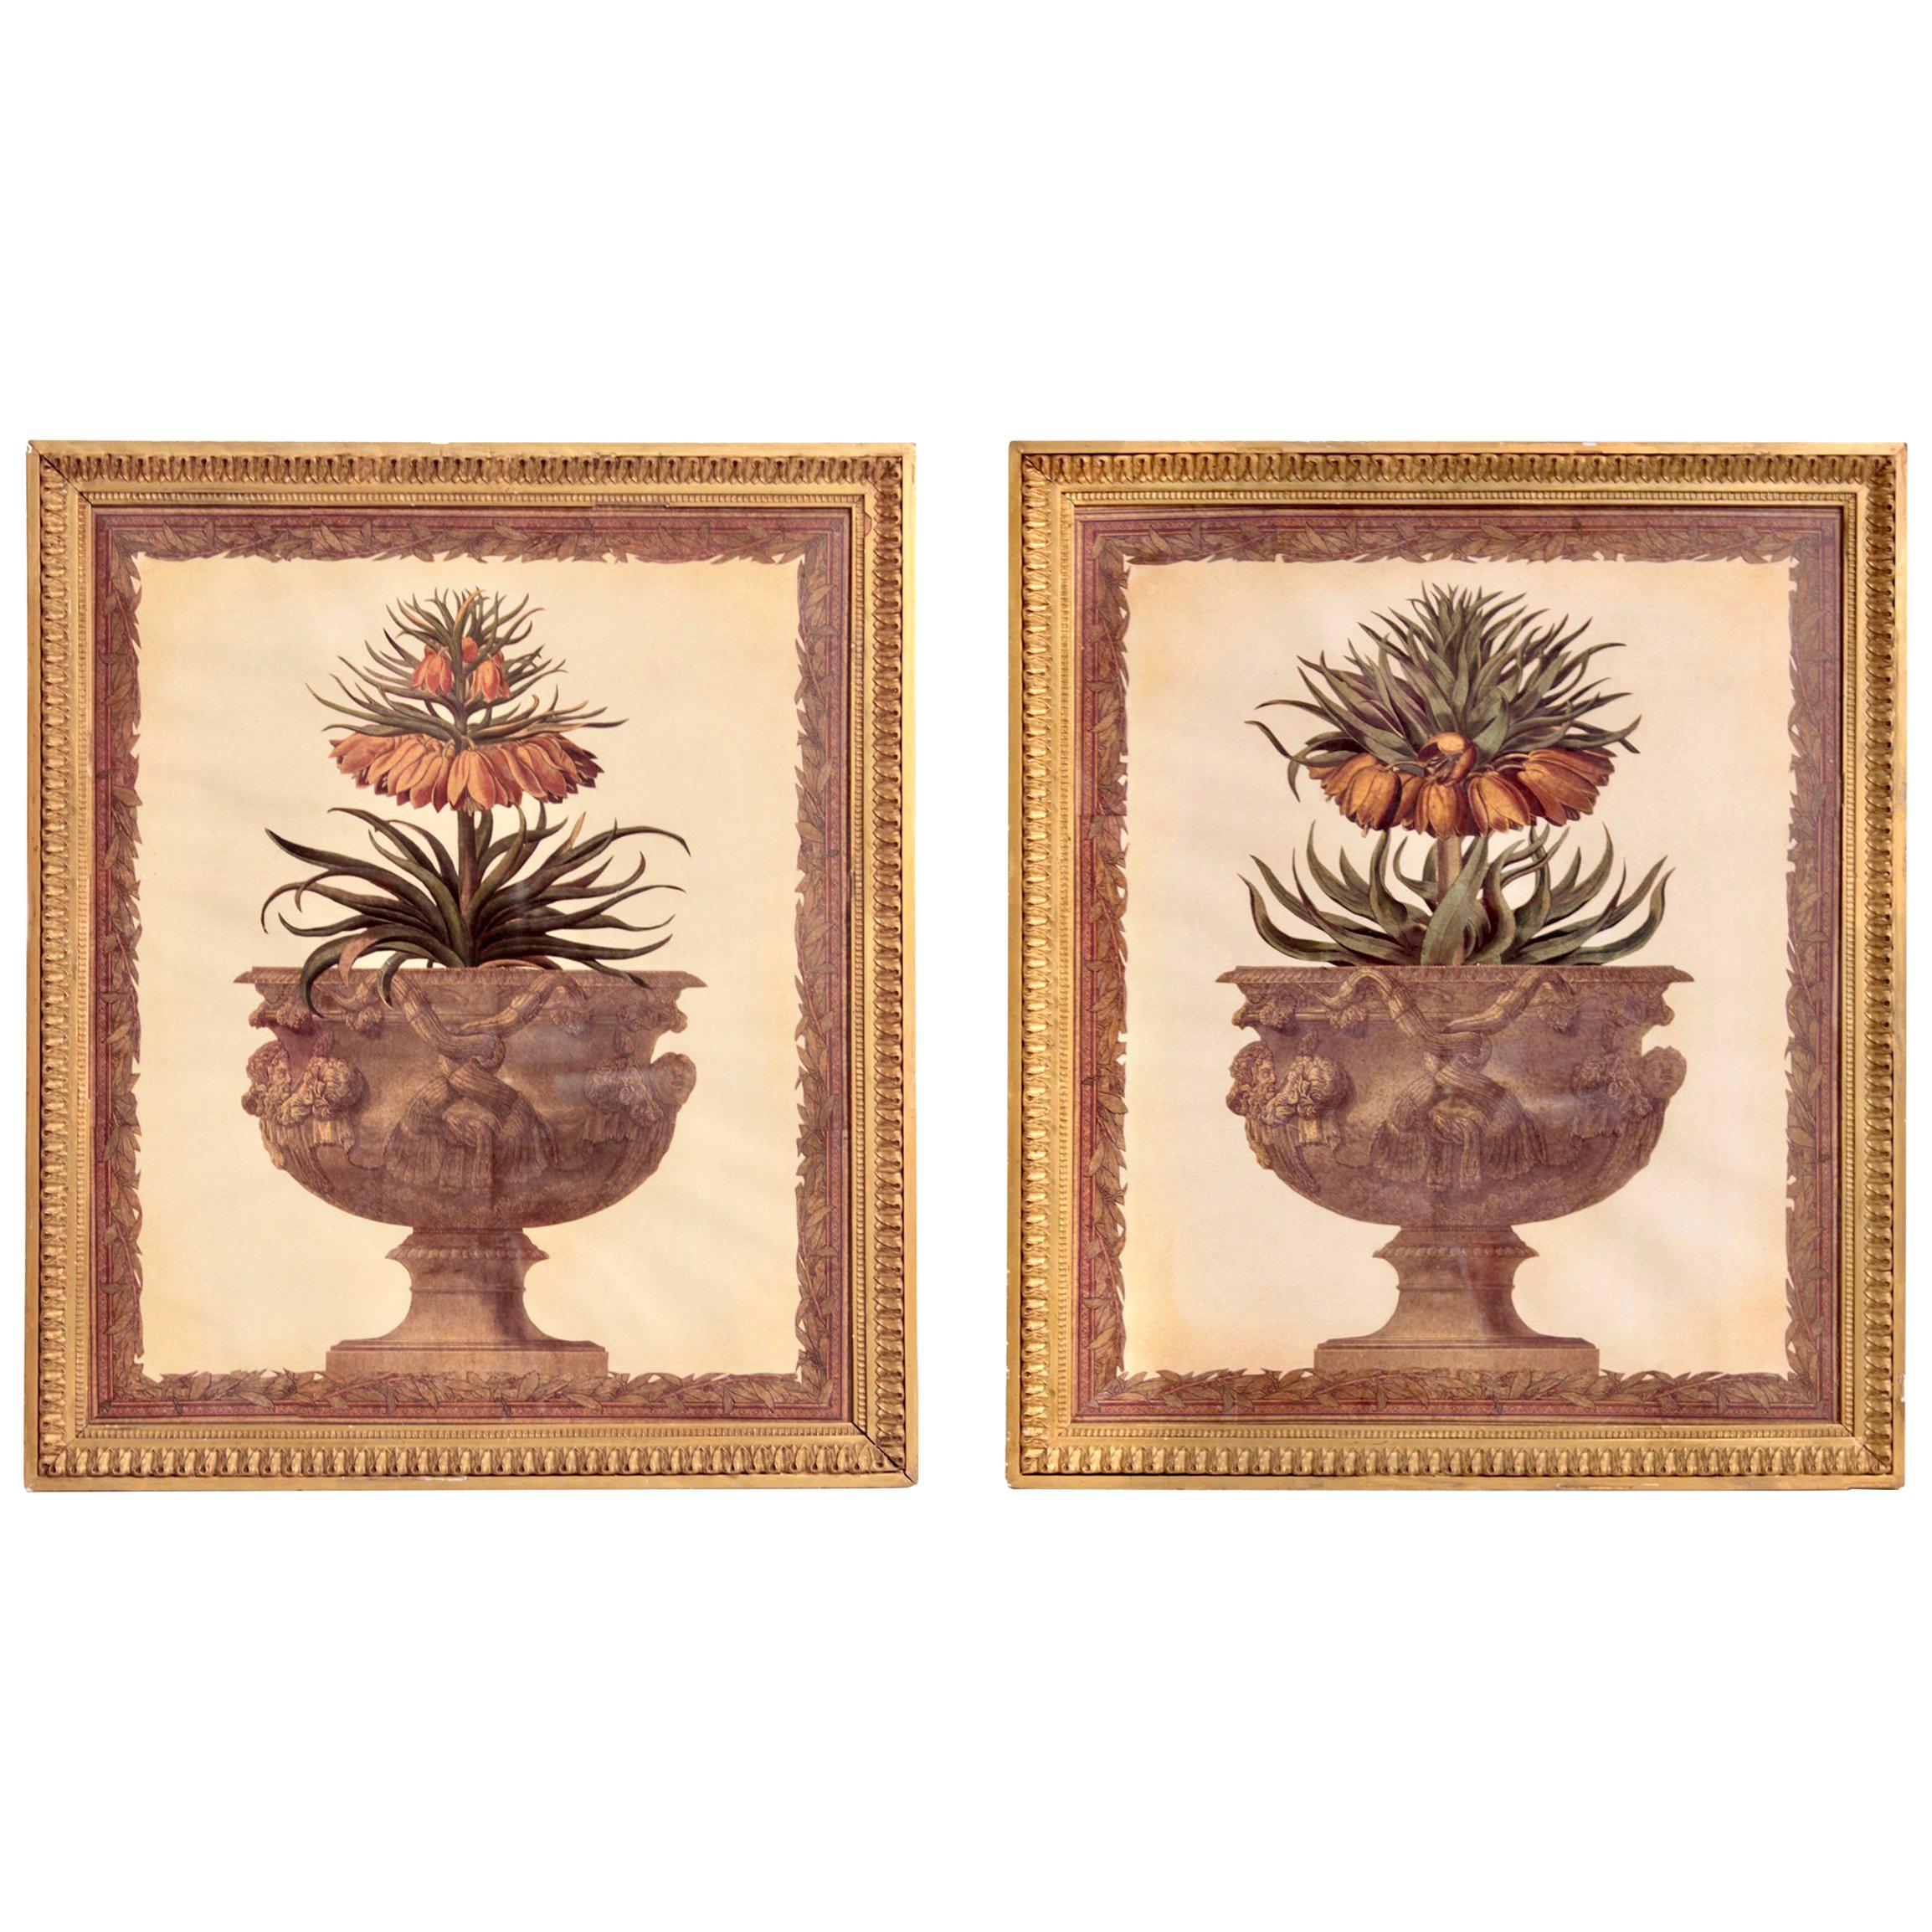 Pair of paper collage compositions from the 19th century, French work.
Original giltwood frames.
Dimensions: 60 cm W x 70 cm H x 2 cm D.

 